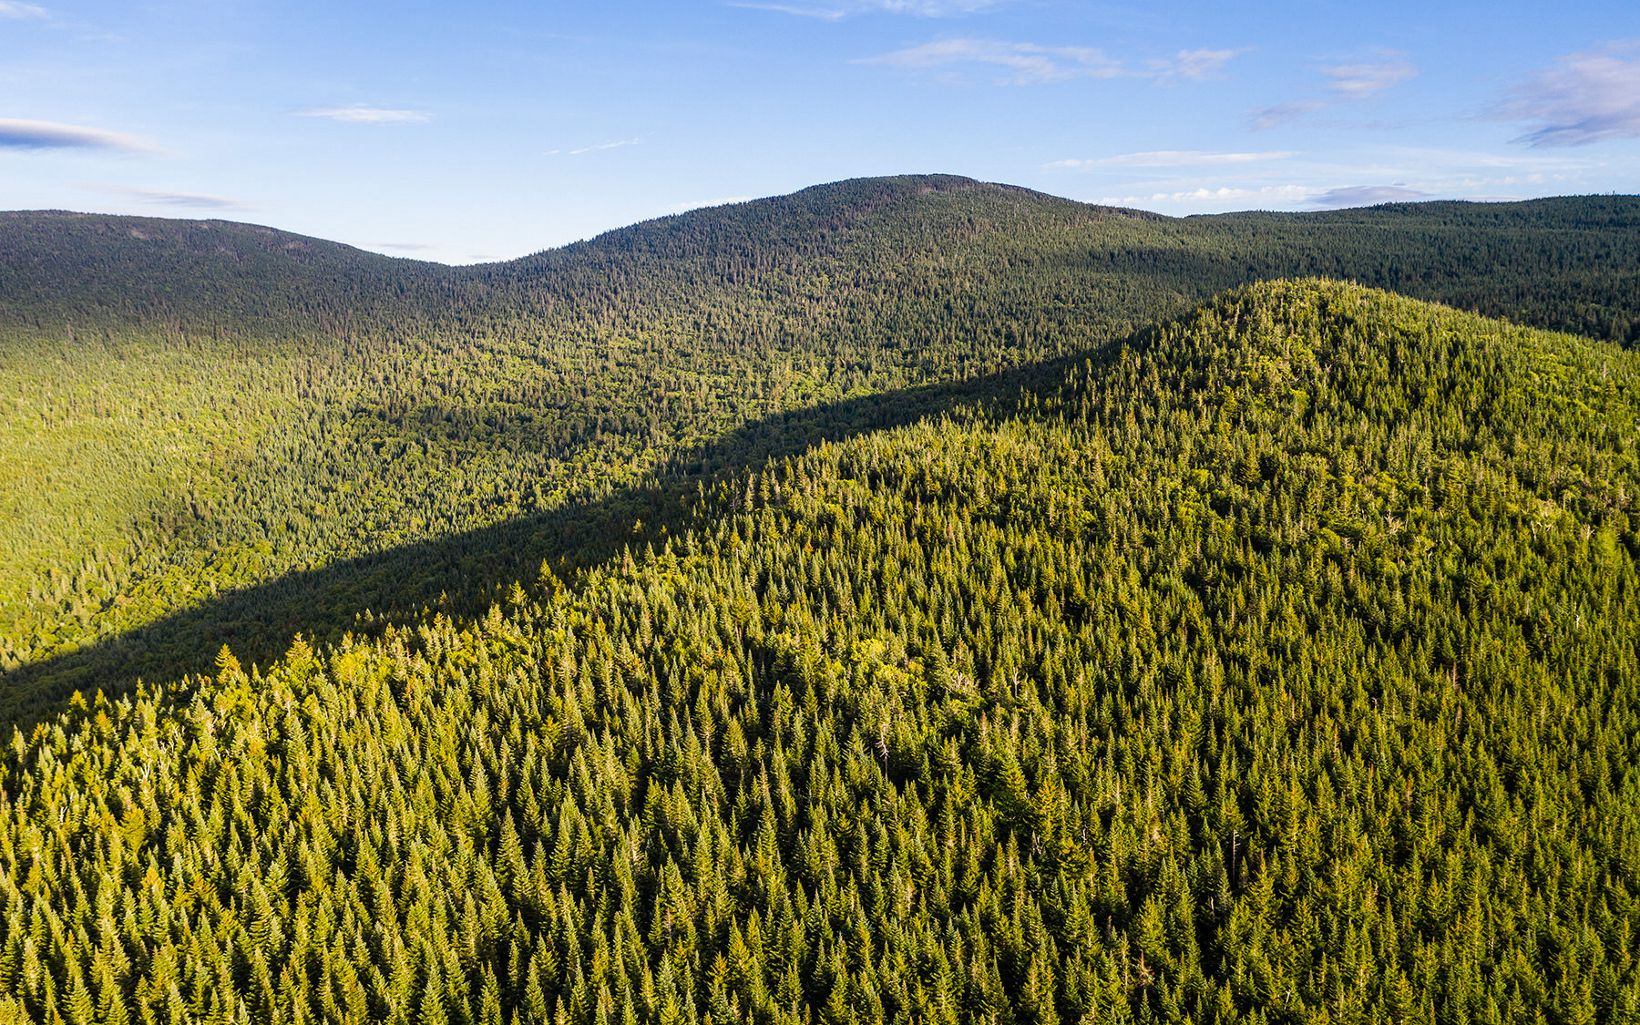 An aerial view shows an expanse of evergreen trees covering a large mountain.